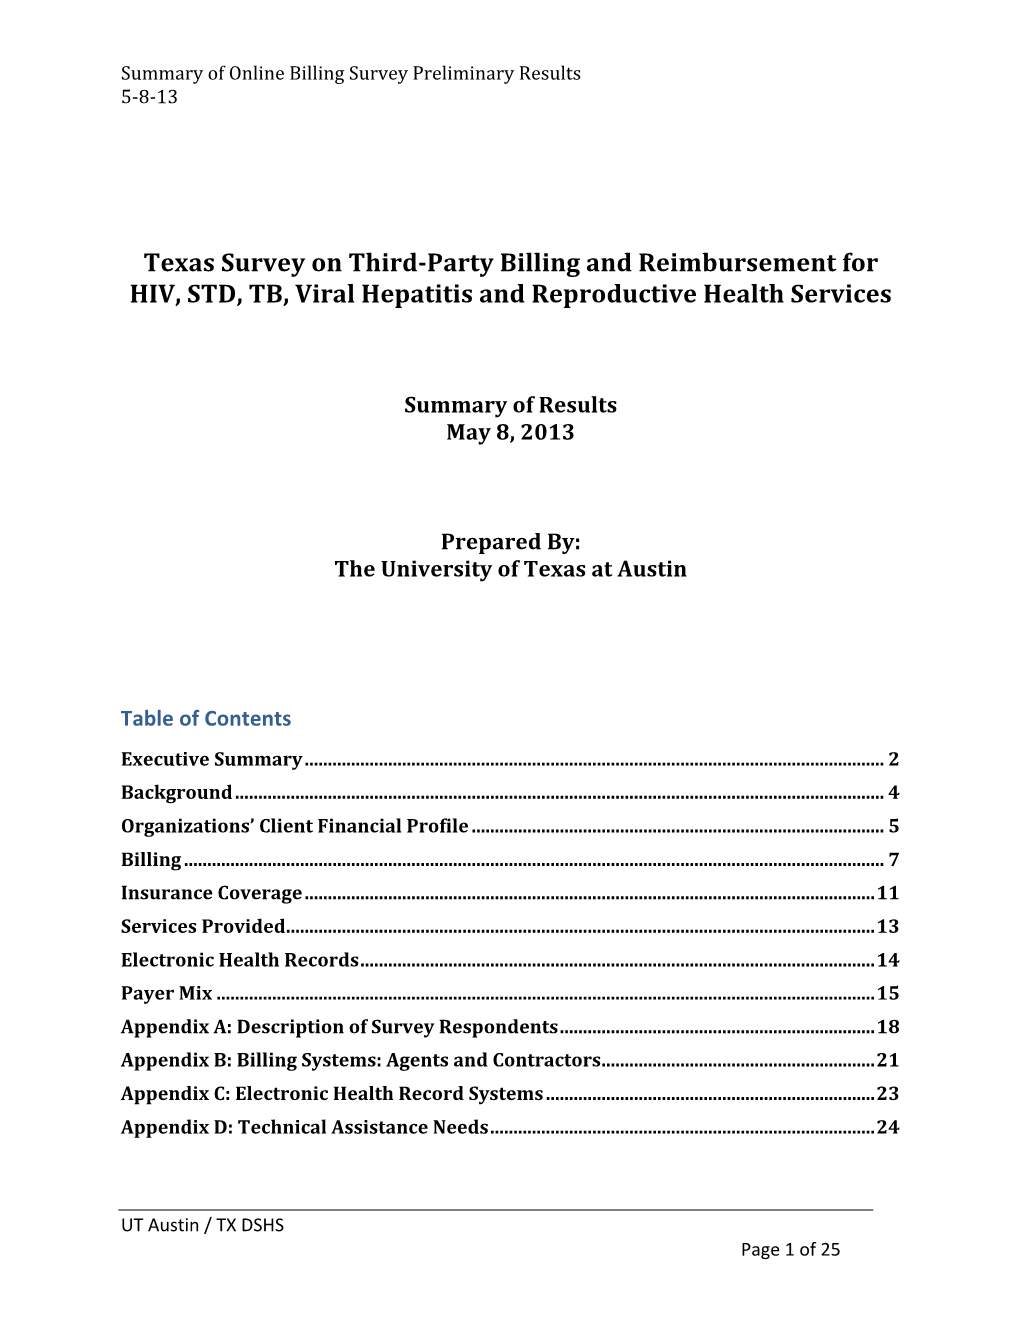 Texas Survey on Third-Party Billing and Reimbursement for HIV, STD, TB, Viral Hepatitis and Reproductive Health Services